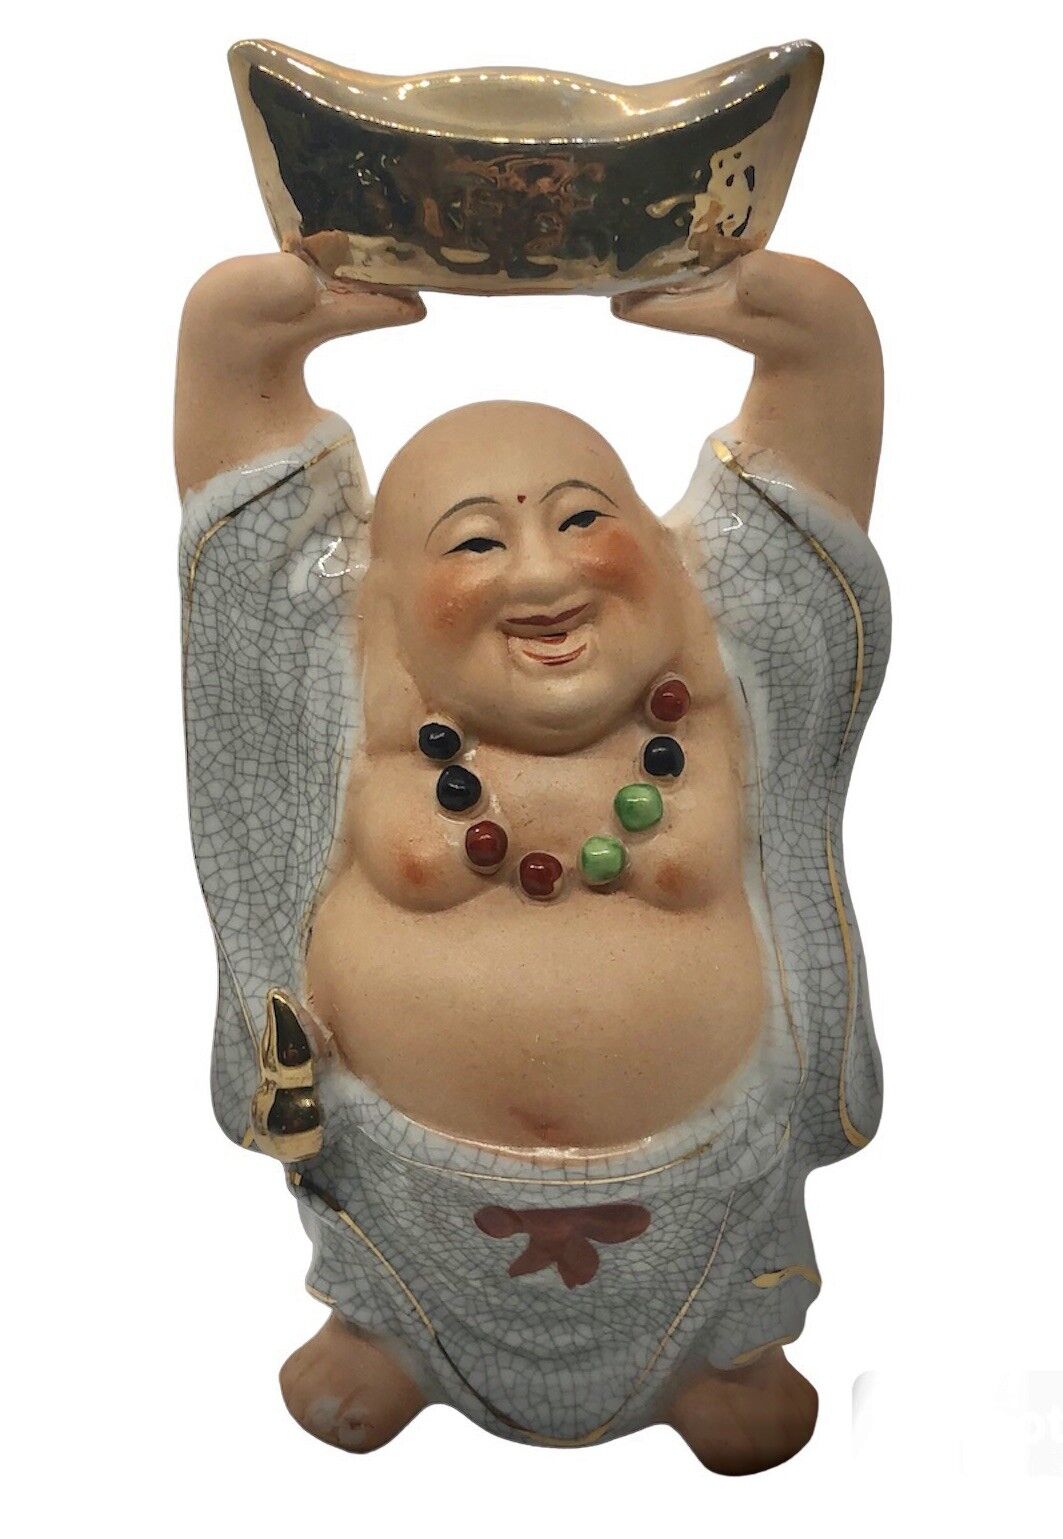 Chinese Laughing Buddha Holding Gold Color Ingot Over Head Figurine Vintage 8.5”